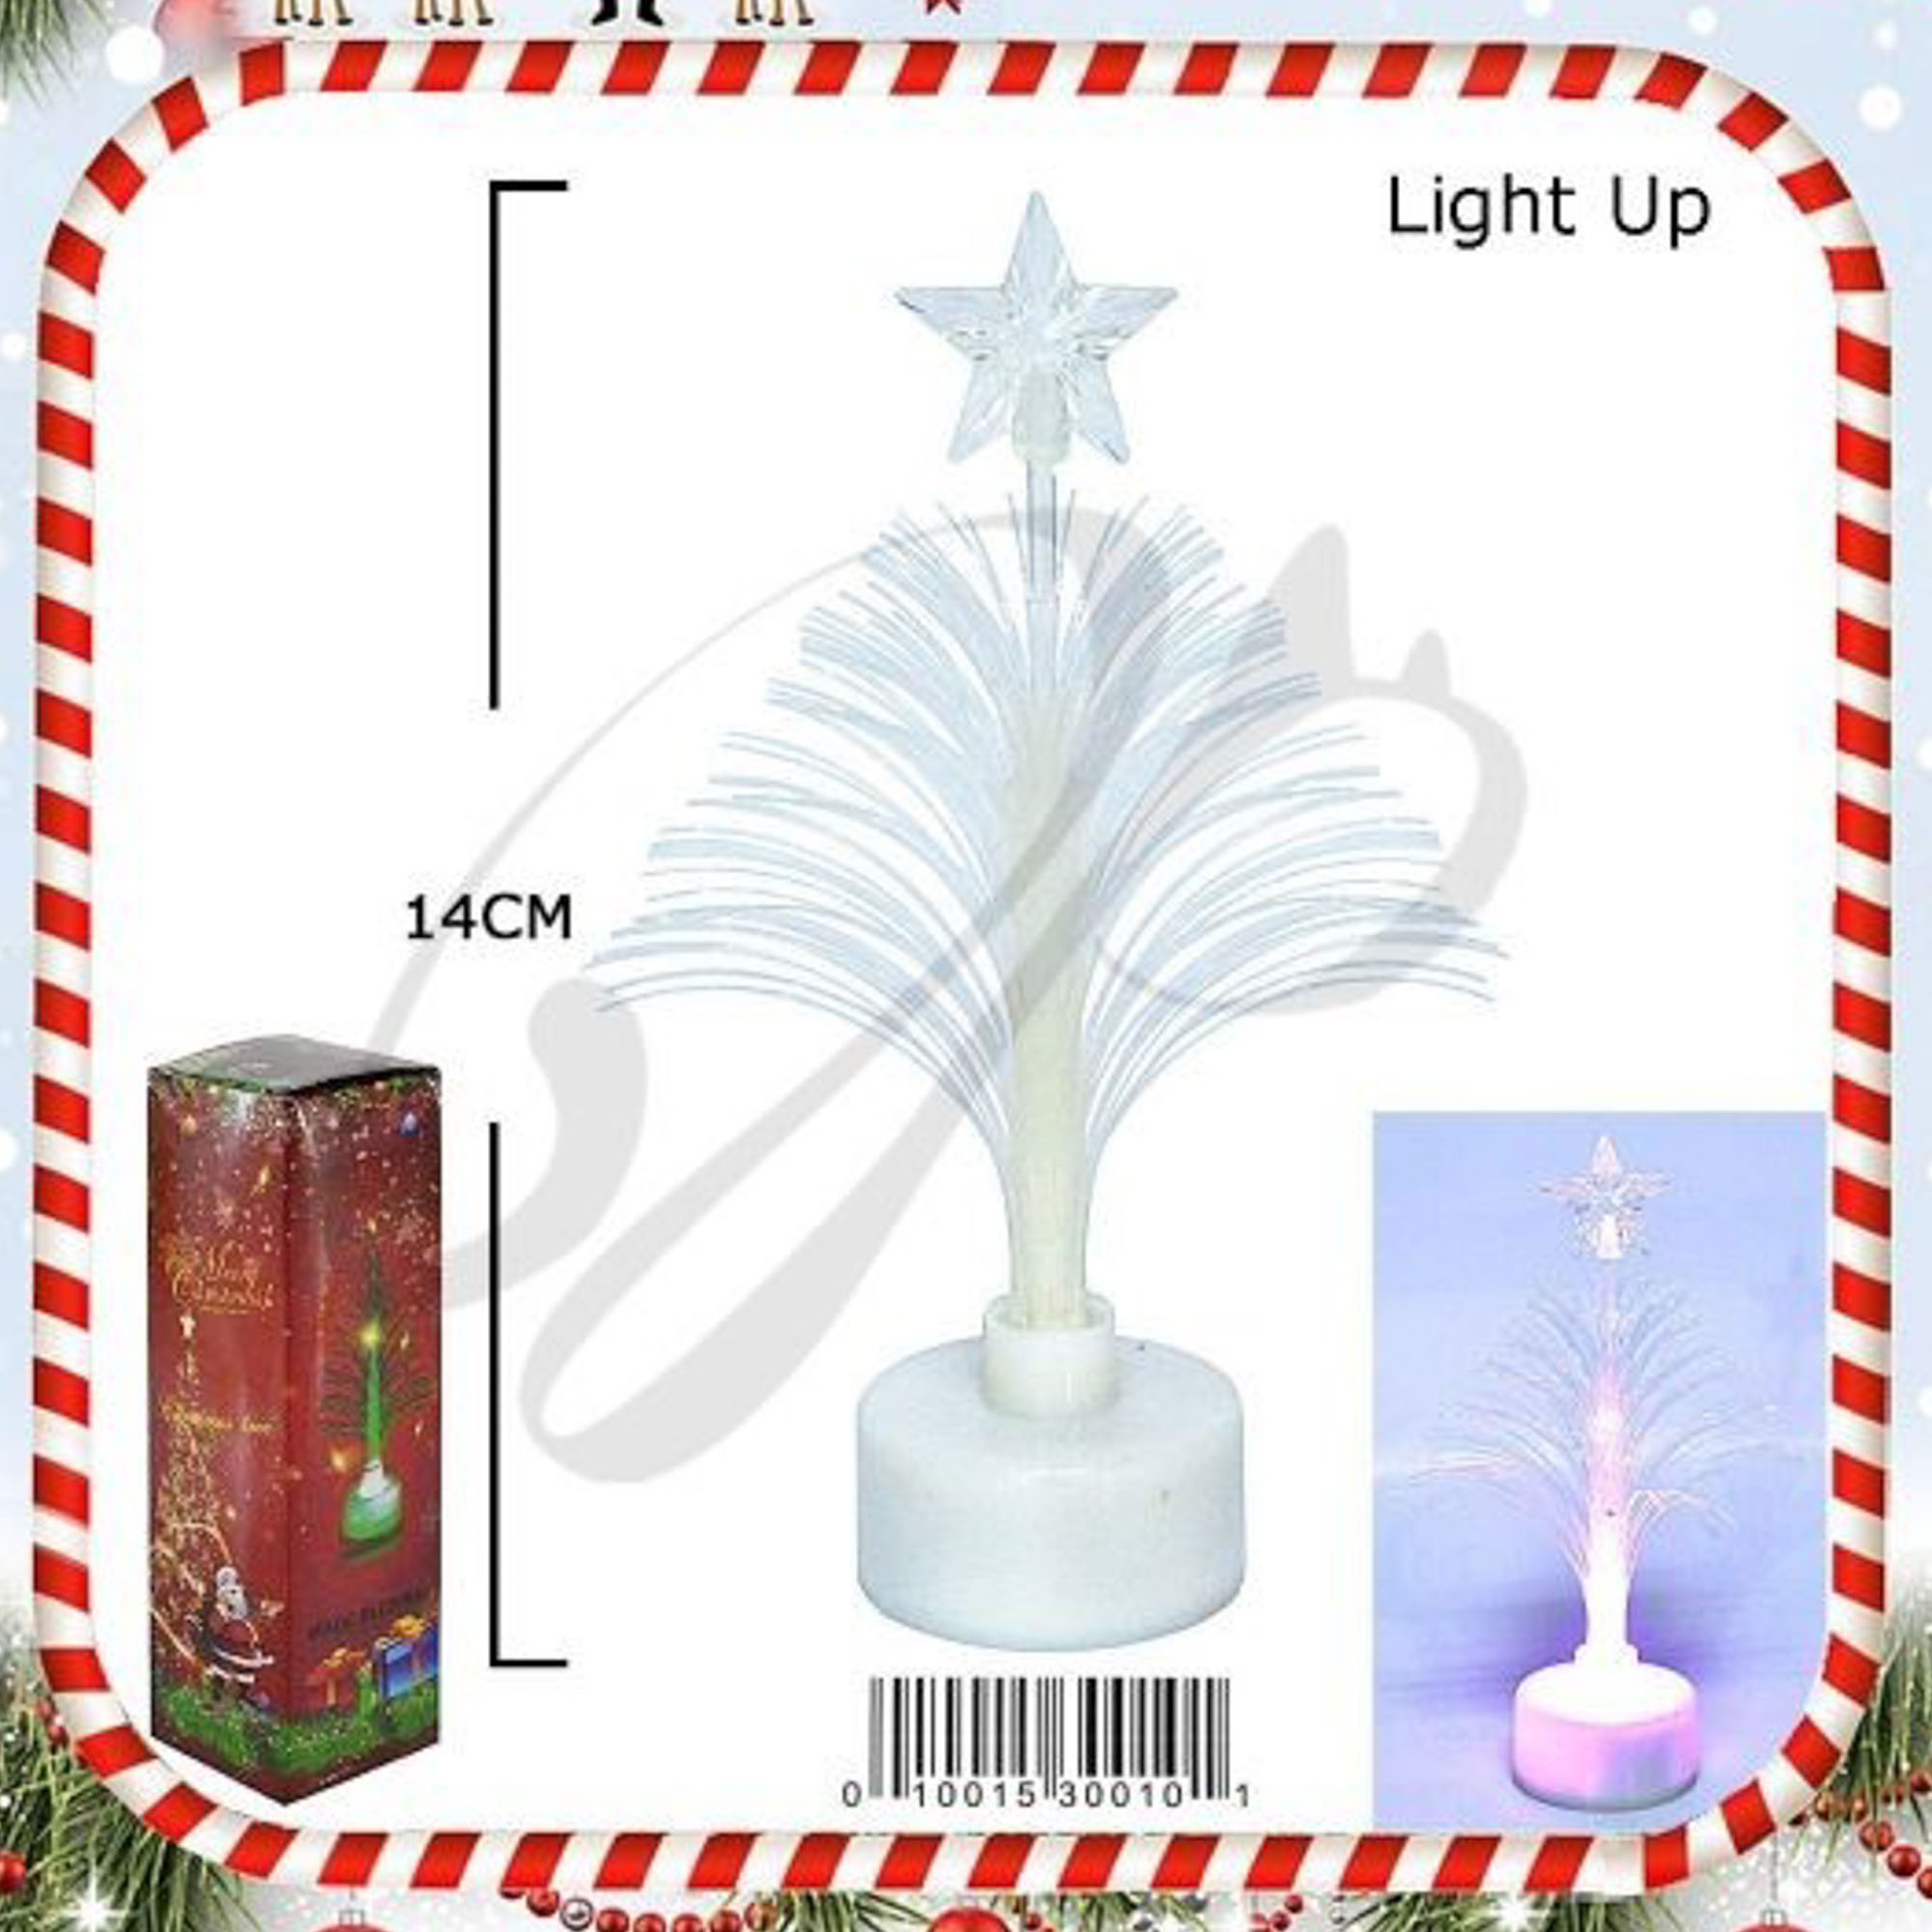 CHRISTMAS LED LIGHT MULTICOLOR FIBER OPTIC LED CHRISTMAS TREE WITH STAND HOME PARTY XMAS DECORATION (12 UNITS)